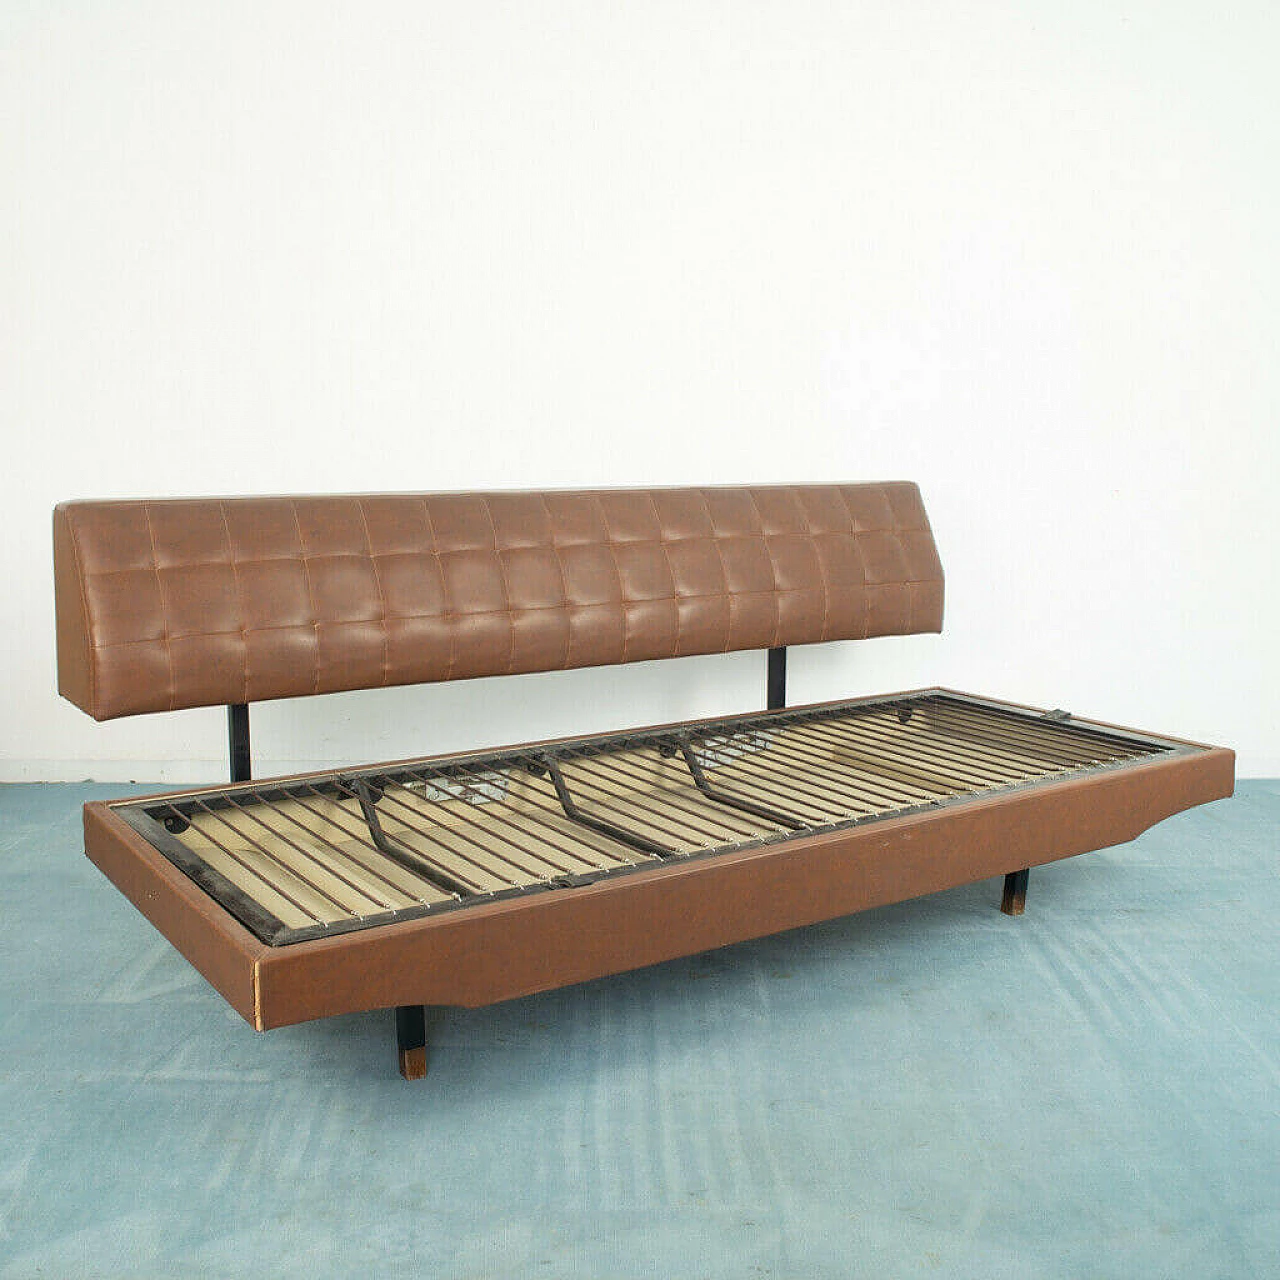 3-Seater sofa or daybed by Marco Zanuso for Flexform, 1950s 1183330